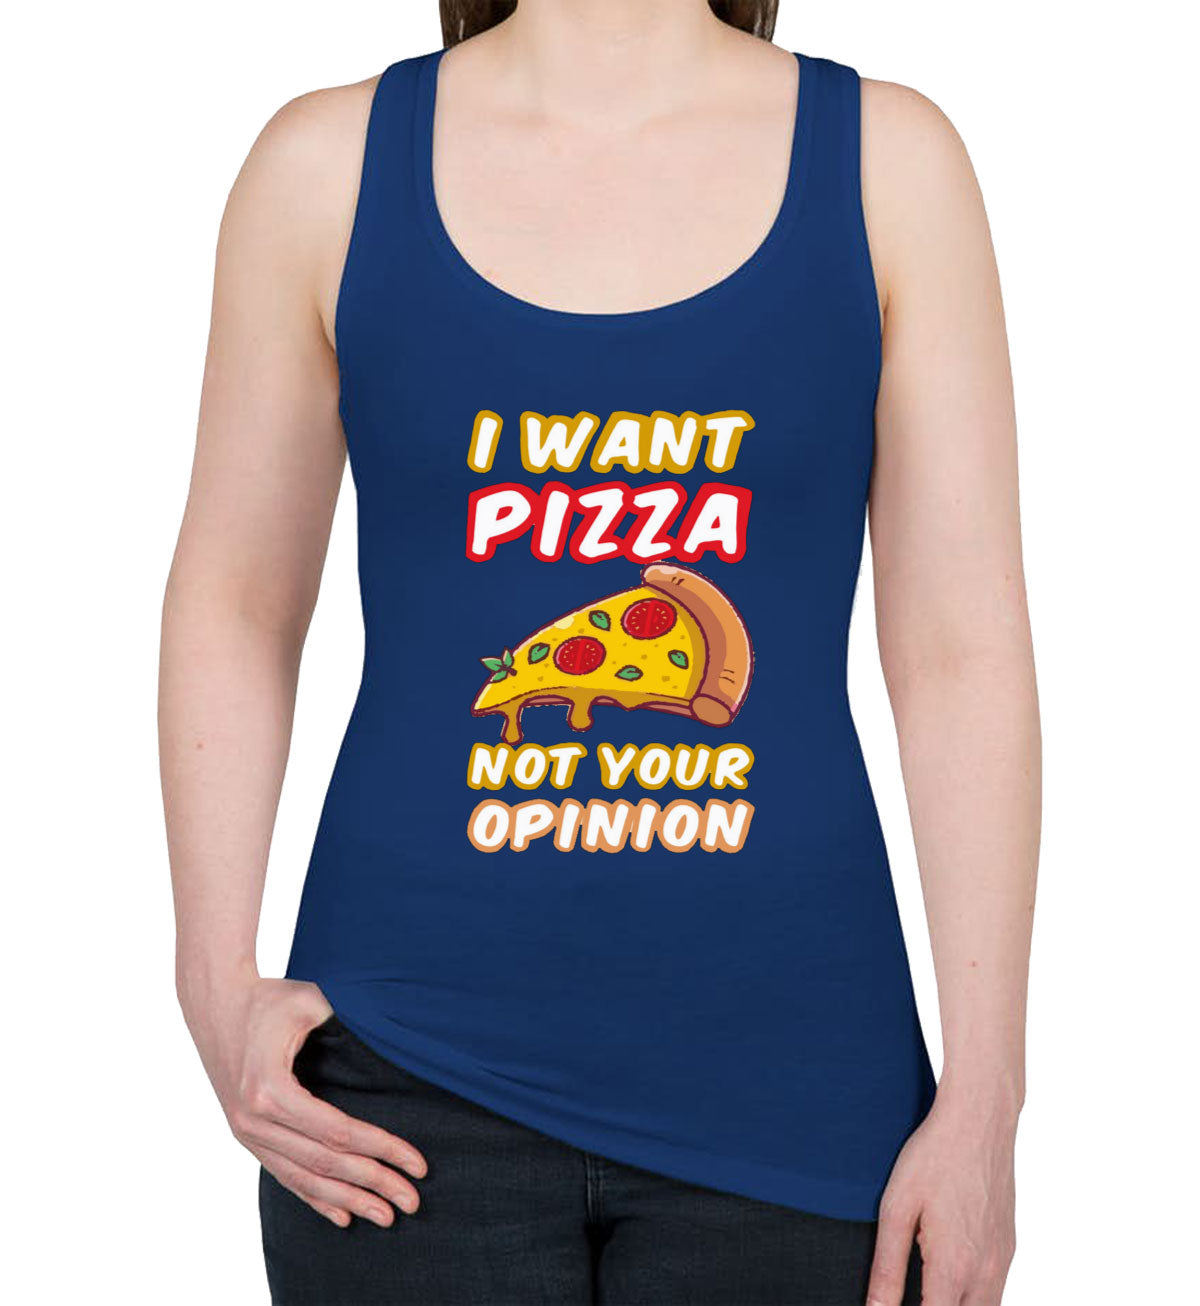 I Want Pizza Not Your Opinion Women's Racerback Tank Top